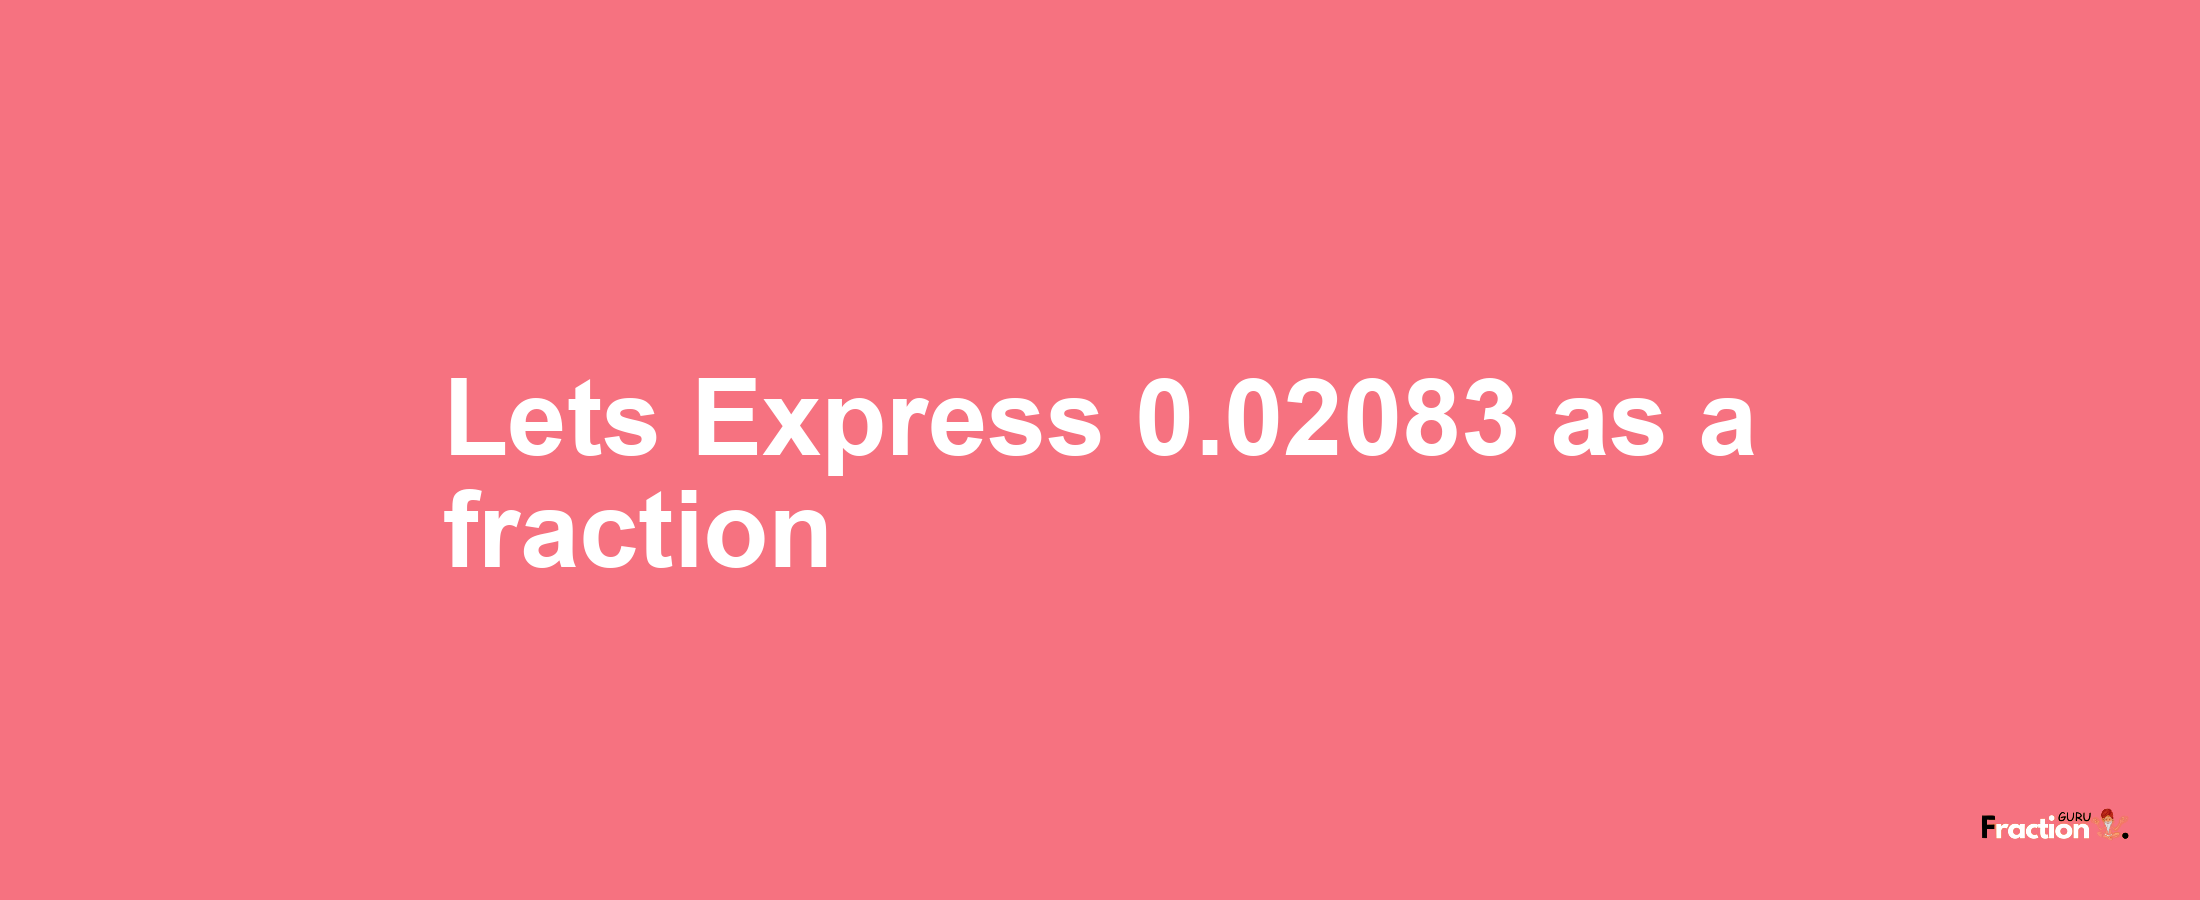 Lets Express 0.02083 as afraction